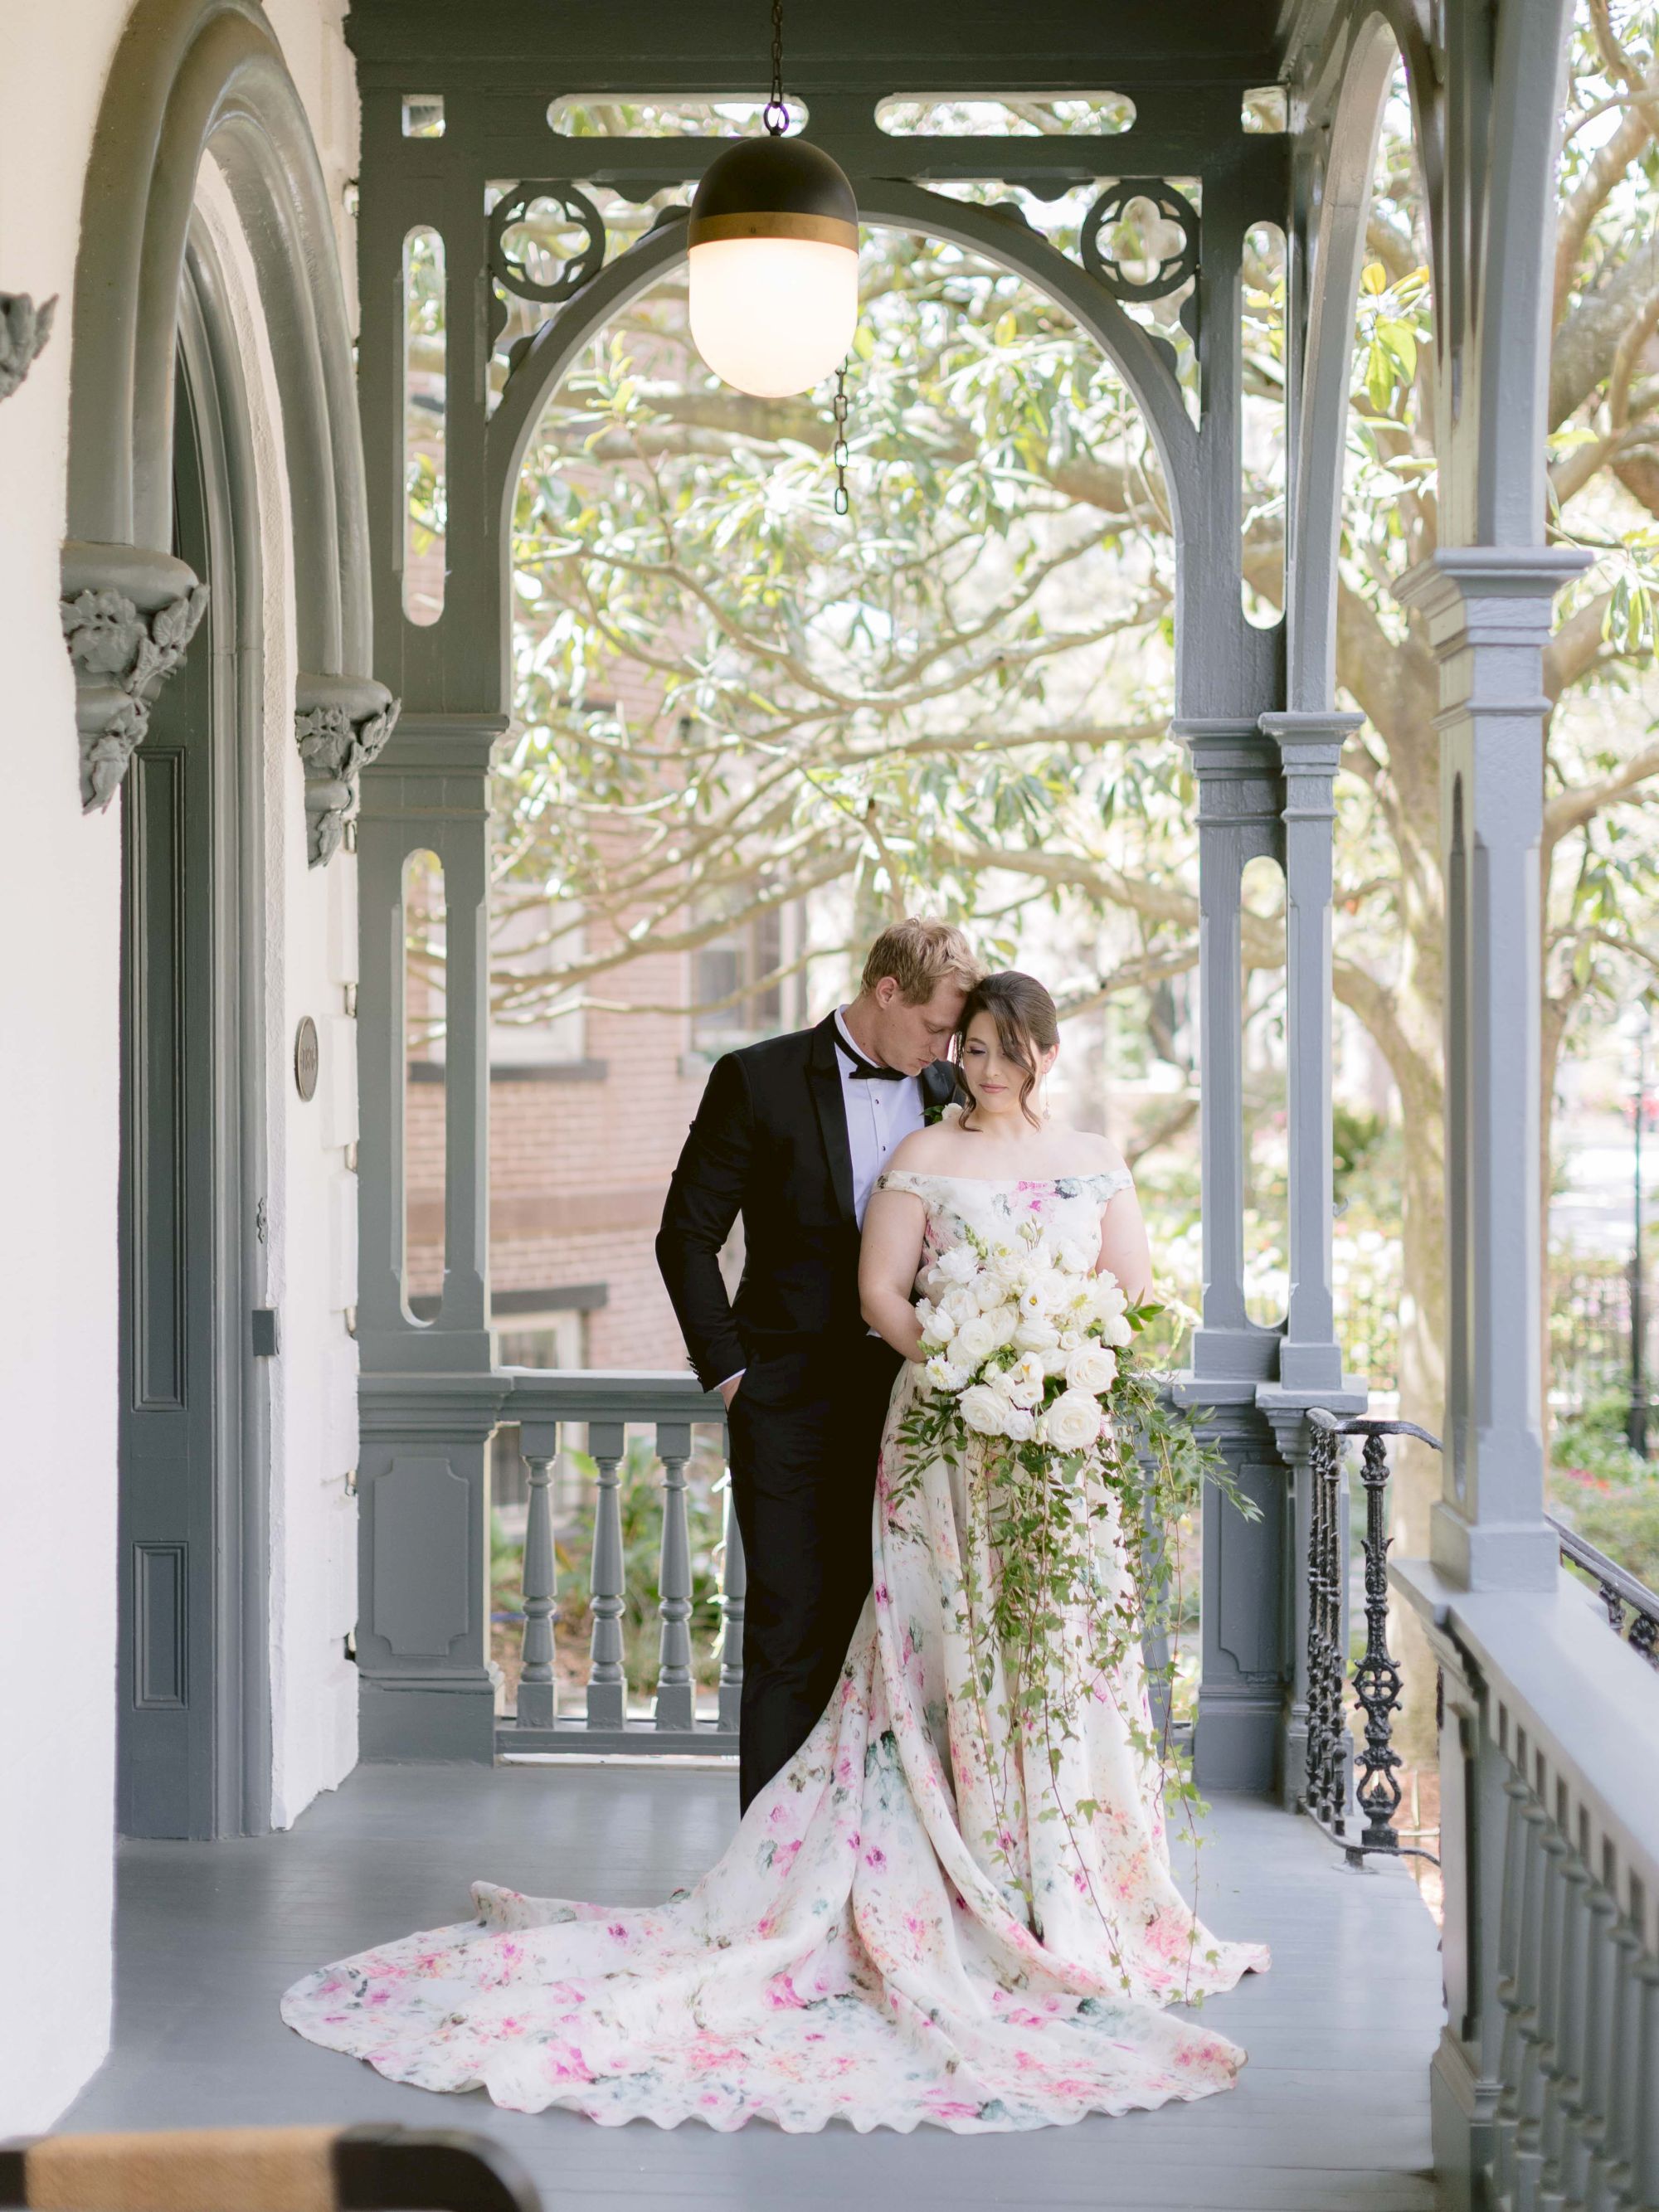 A couple dressed in wedding attire stands closely on a decorated porch with greenery in the background, sharing a tender moment.